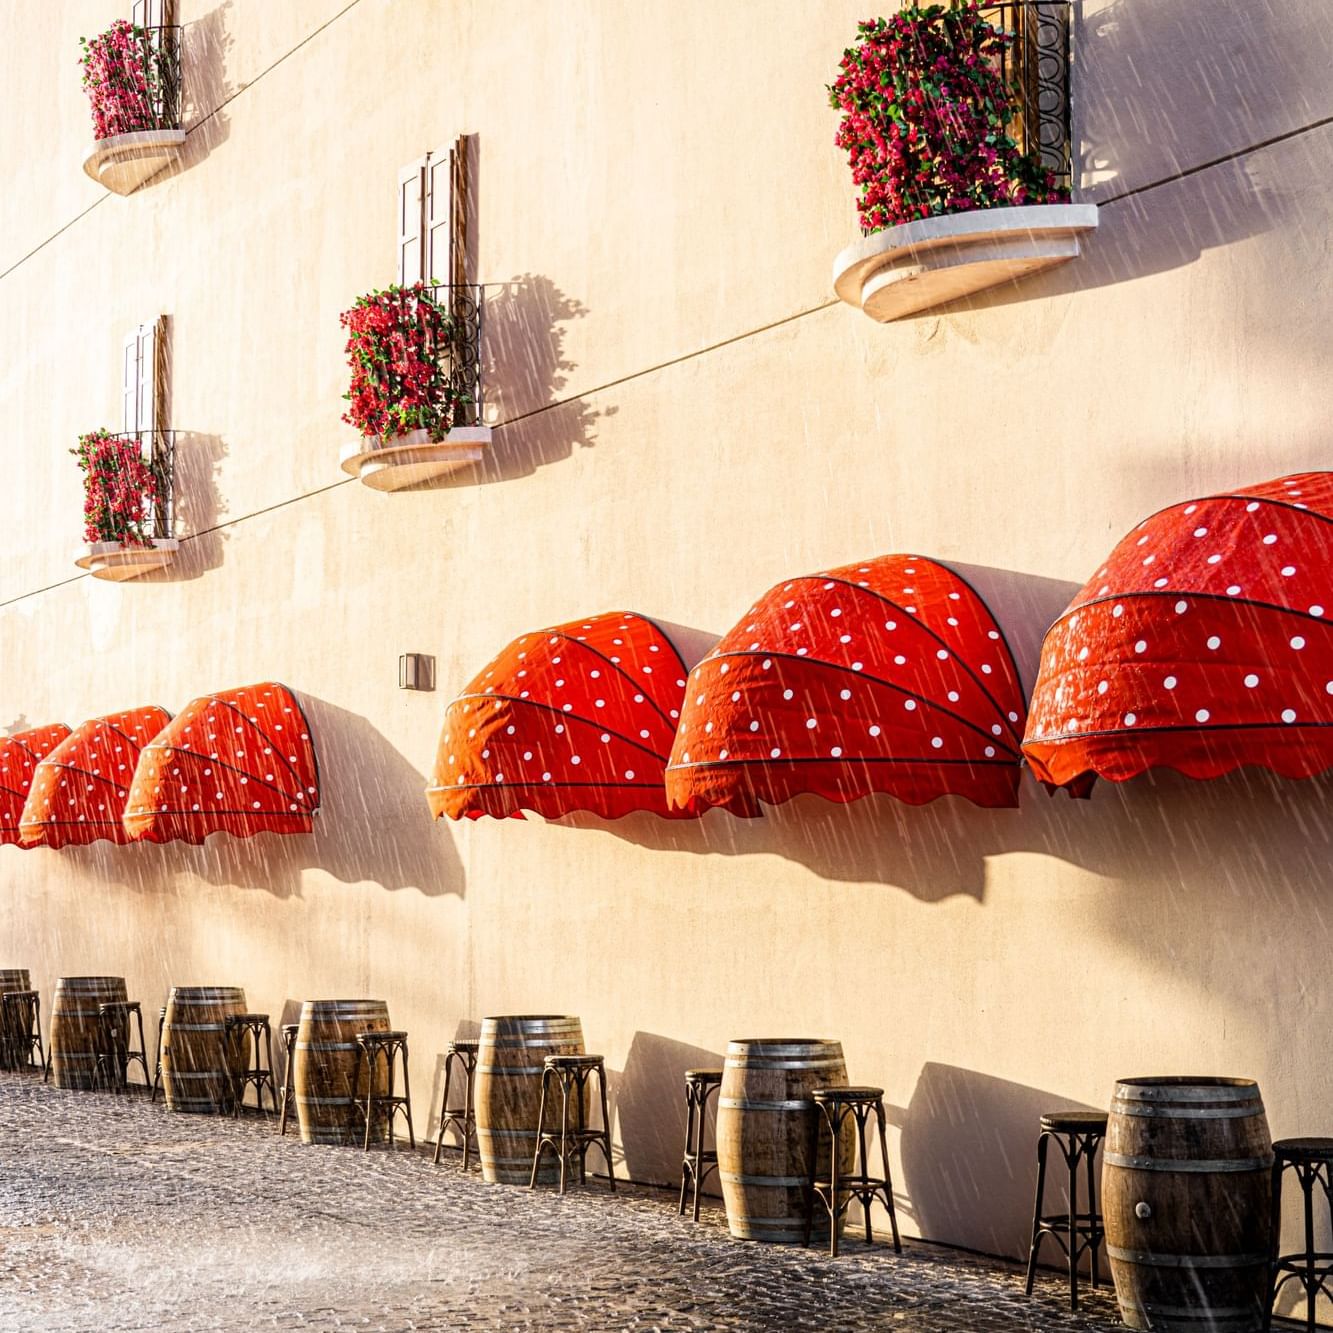 Red unlatched canopies over the Restaurant dining tables on a rainy day at Côte d'Azur Resort